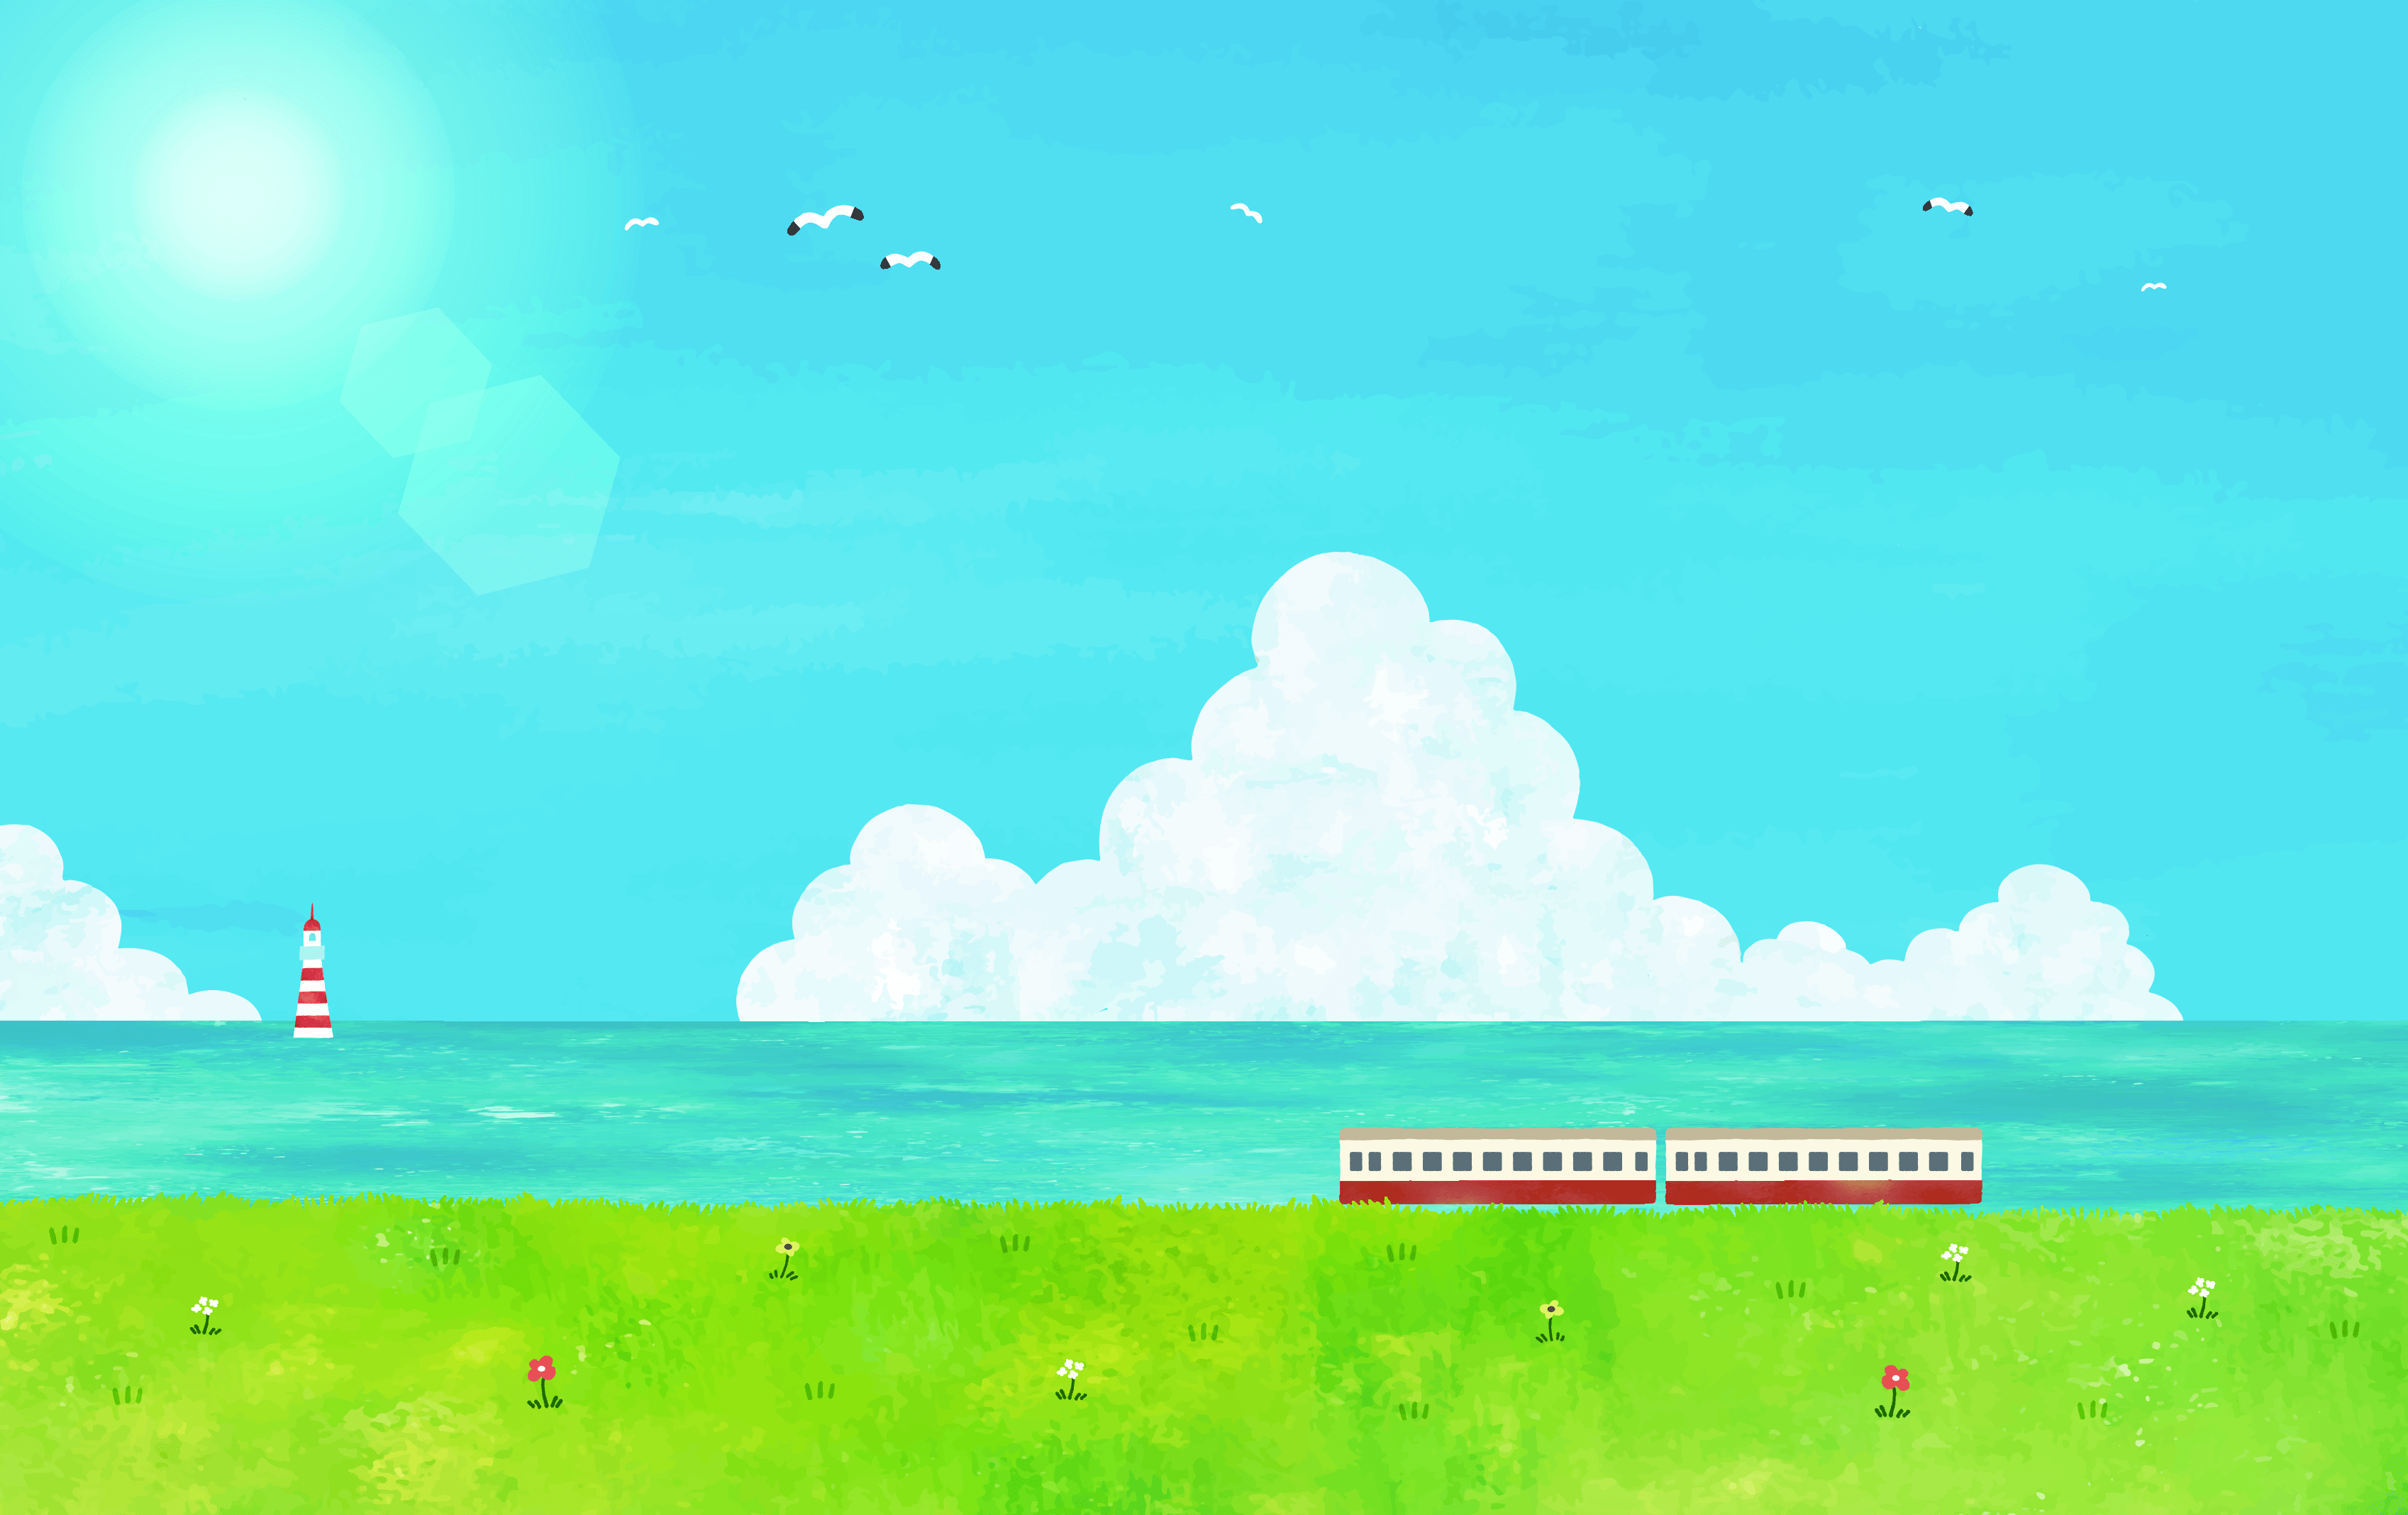 A watercolour-style illustration of a red and cream train with a beige roof and dark windows in front of a turquoise sea. The train is positioned towards the bottom right of the image on top of a section of green grass with colourful flowers which runs along the bottom of the image. The ocean behind the train is quite a small strip running parallel above the grass. In the top left of the ocean is a red and white striped lighthouse. Above the ocean two fluffy white clouds sit on the horizon line. Most of the image is then blue sky with a blurred blue sun top left and white seagulls.